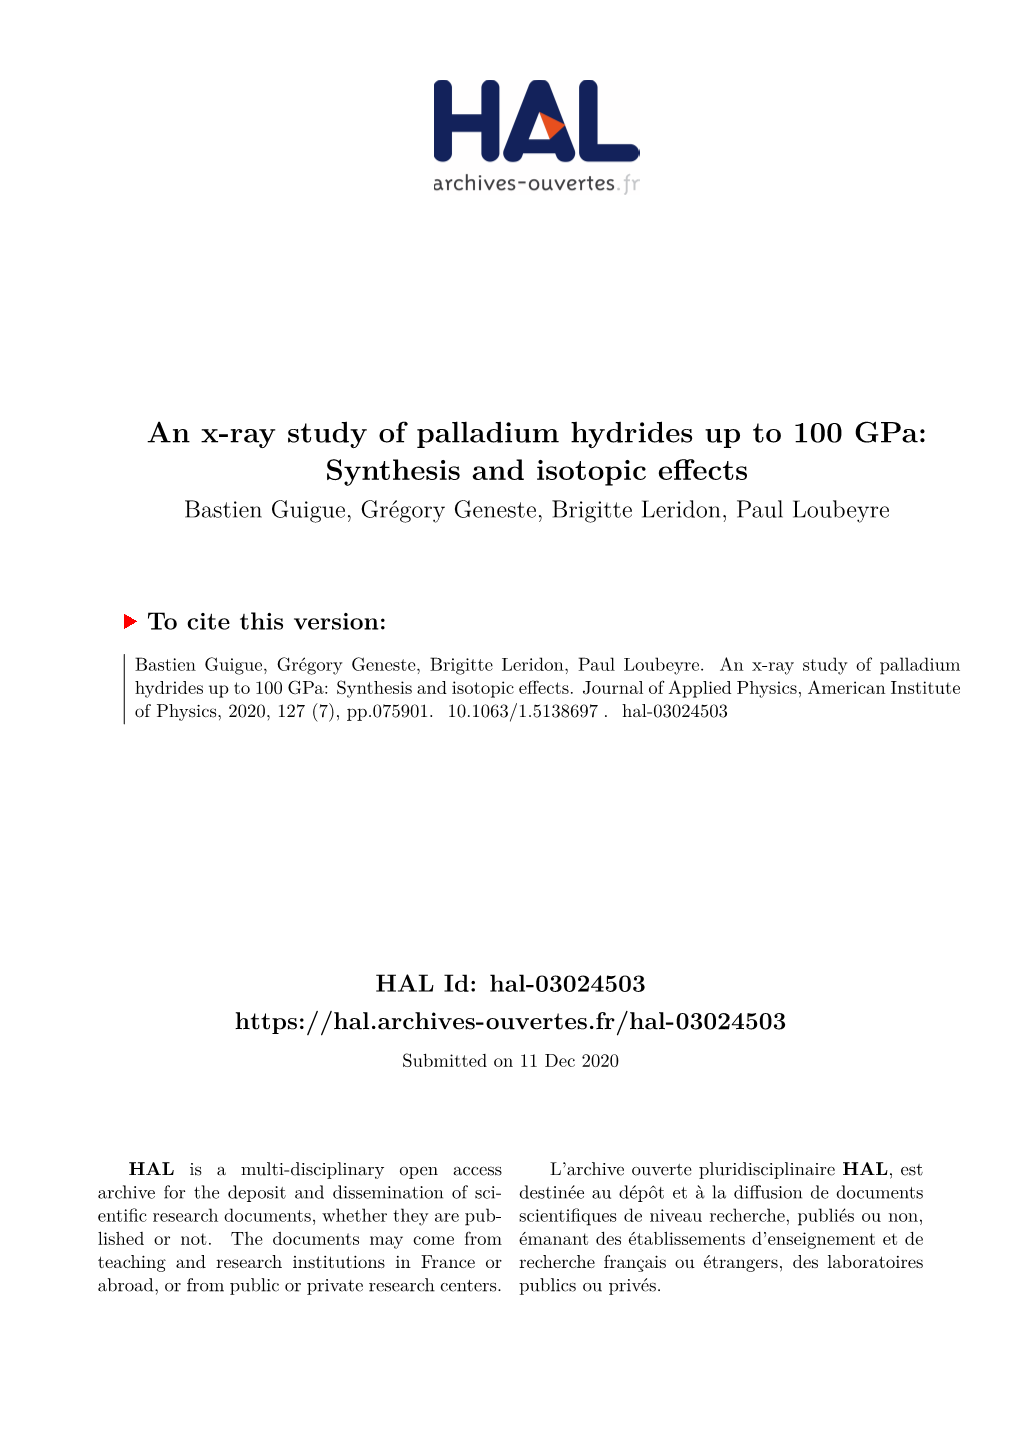 An X-Ray Study of Palladium Hydrides up to 100 Gpa: Synthesis and Isotopic Effects Bastien Guigue, Grégory Geneste, Brigitte Leridon, Paul Loubeyre